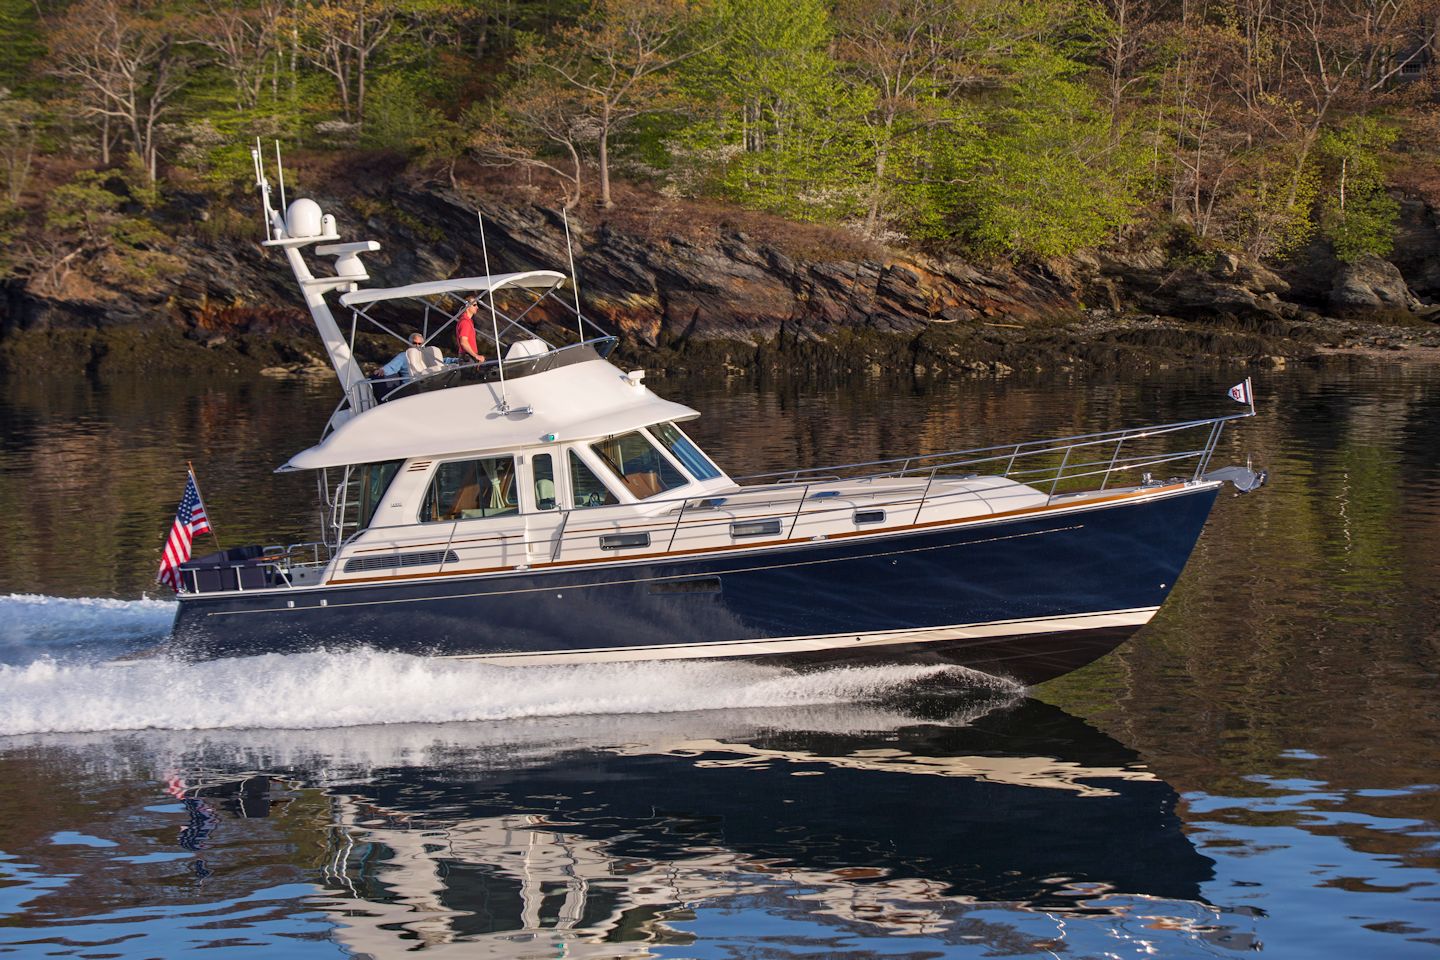 360 VR Virtual Tours of the Sabre 48 Flybridge